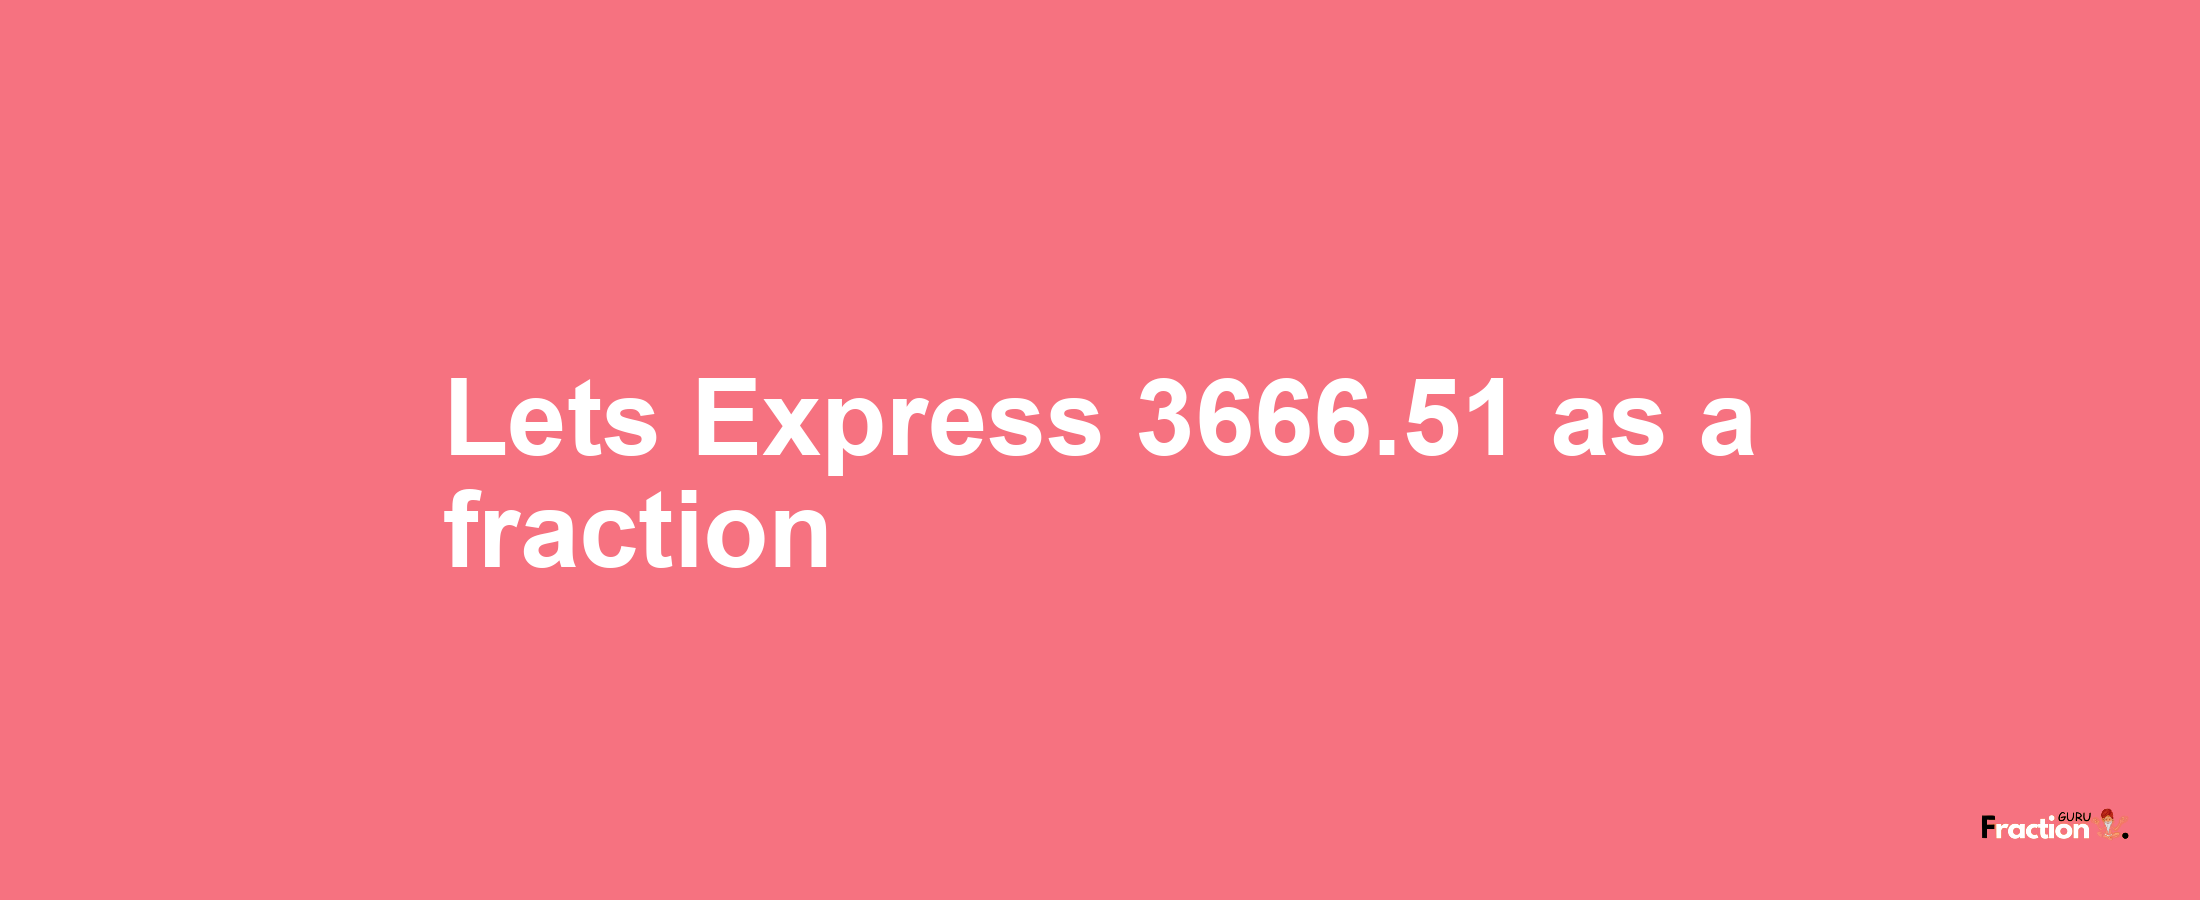 Lets Express 3666.51 as afraction